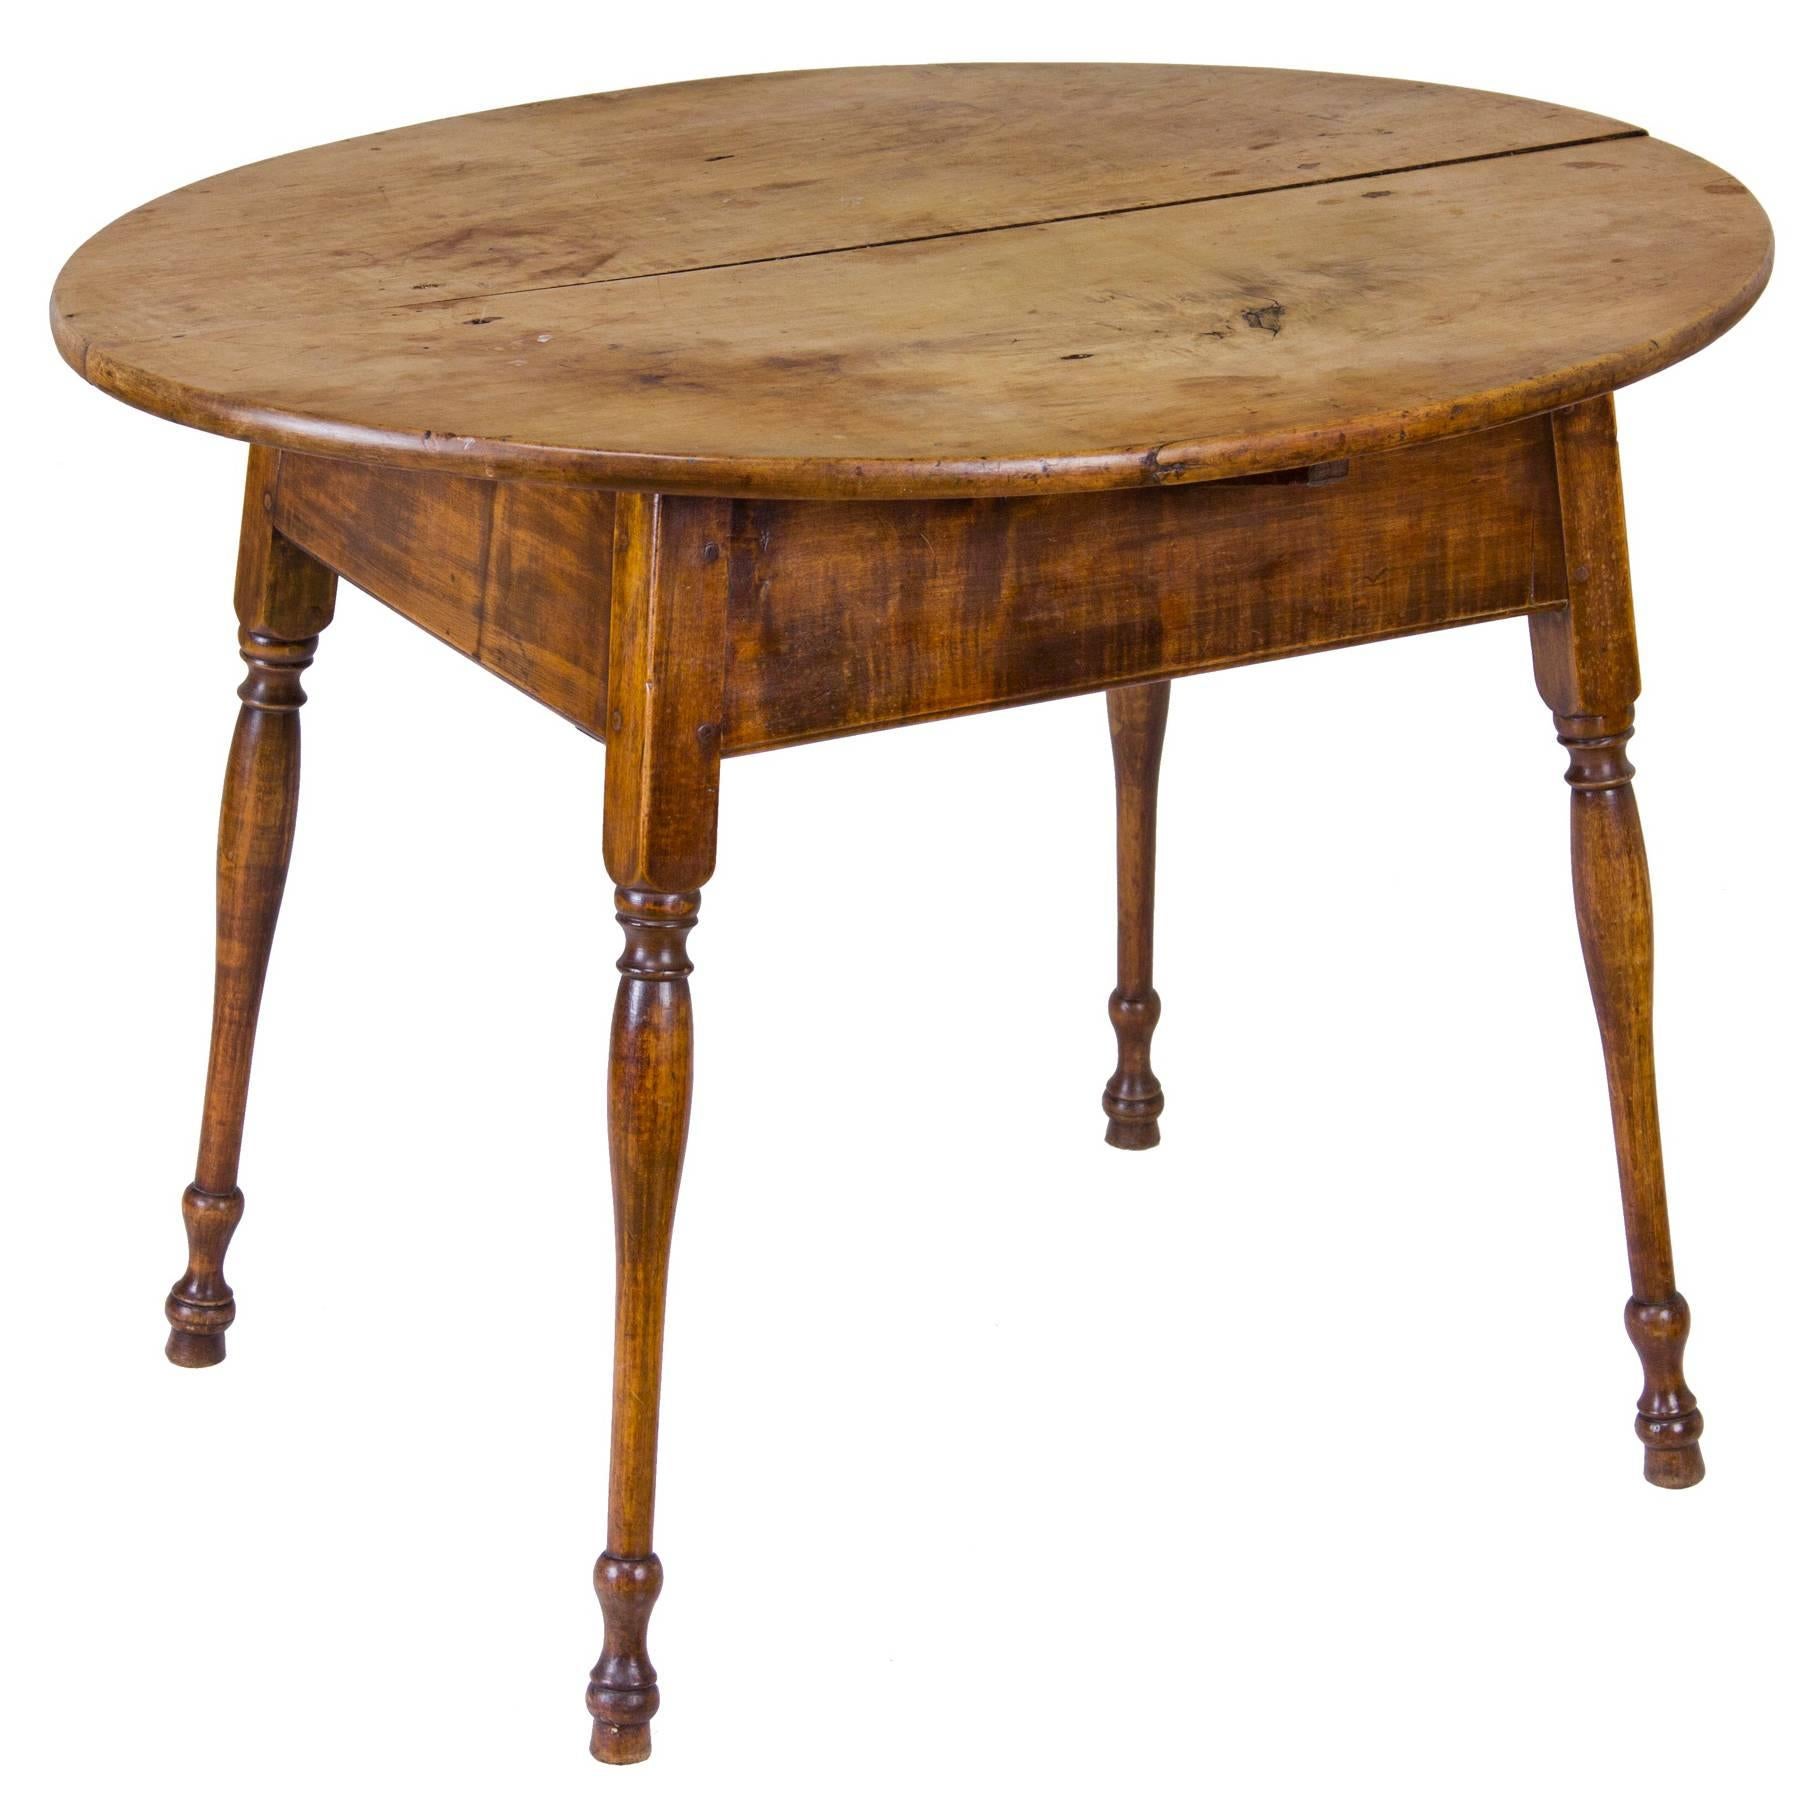 Large Figured Maple Oval Top Tavern Table, Probably CT, Splayed Legs, circa 1760 For Sale